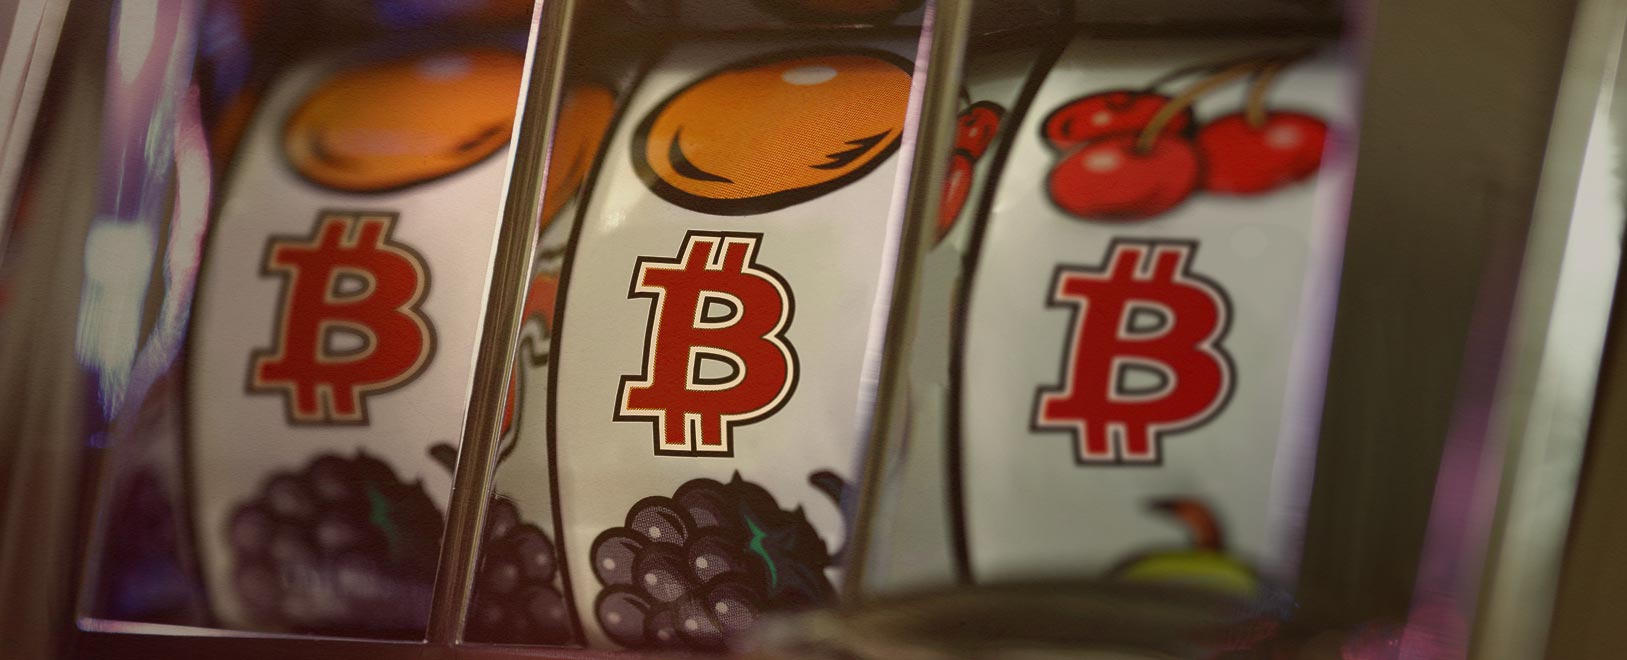 depositing bitcoin from ignition casino